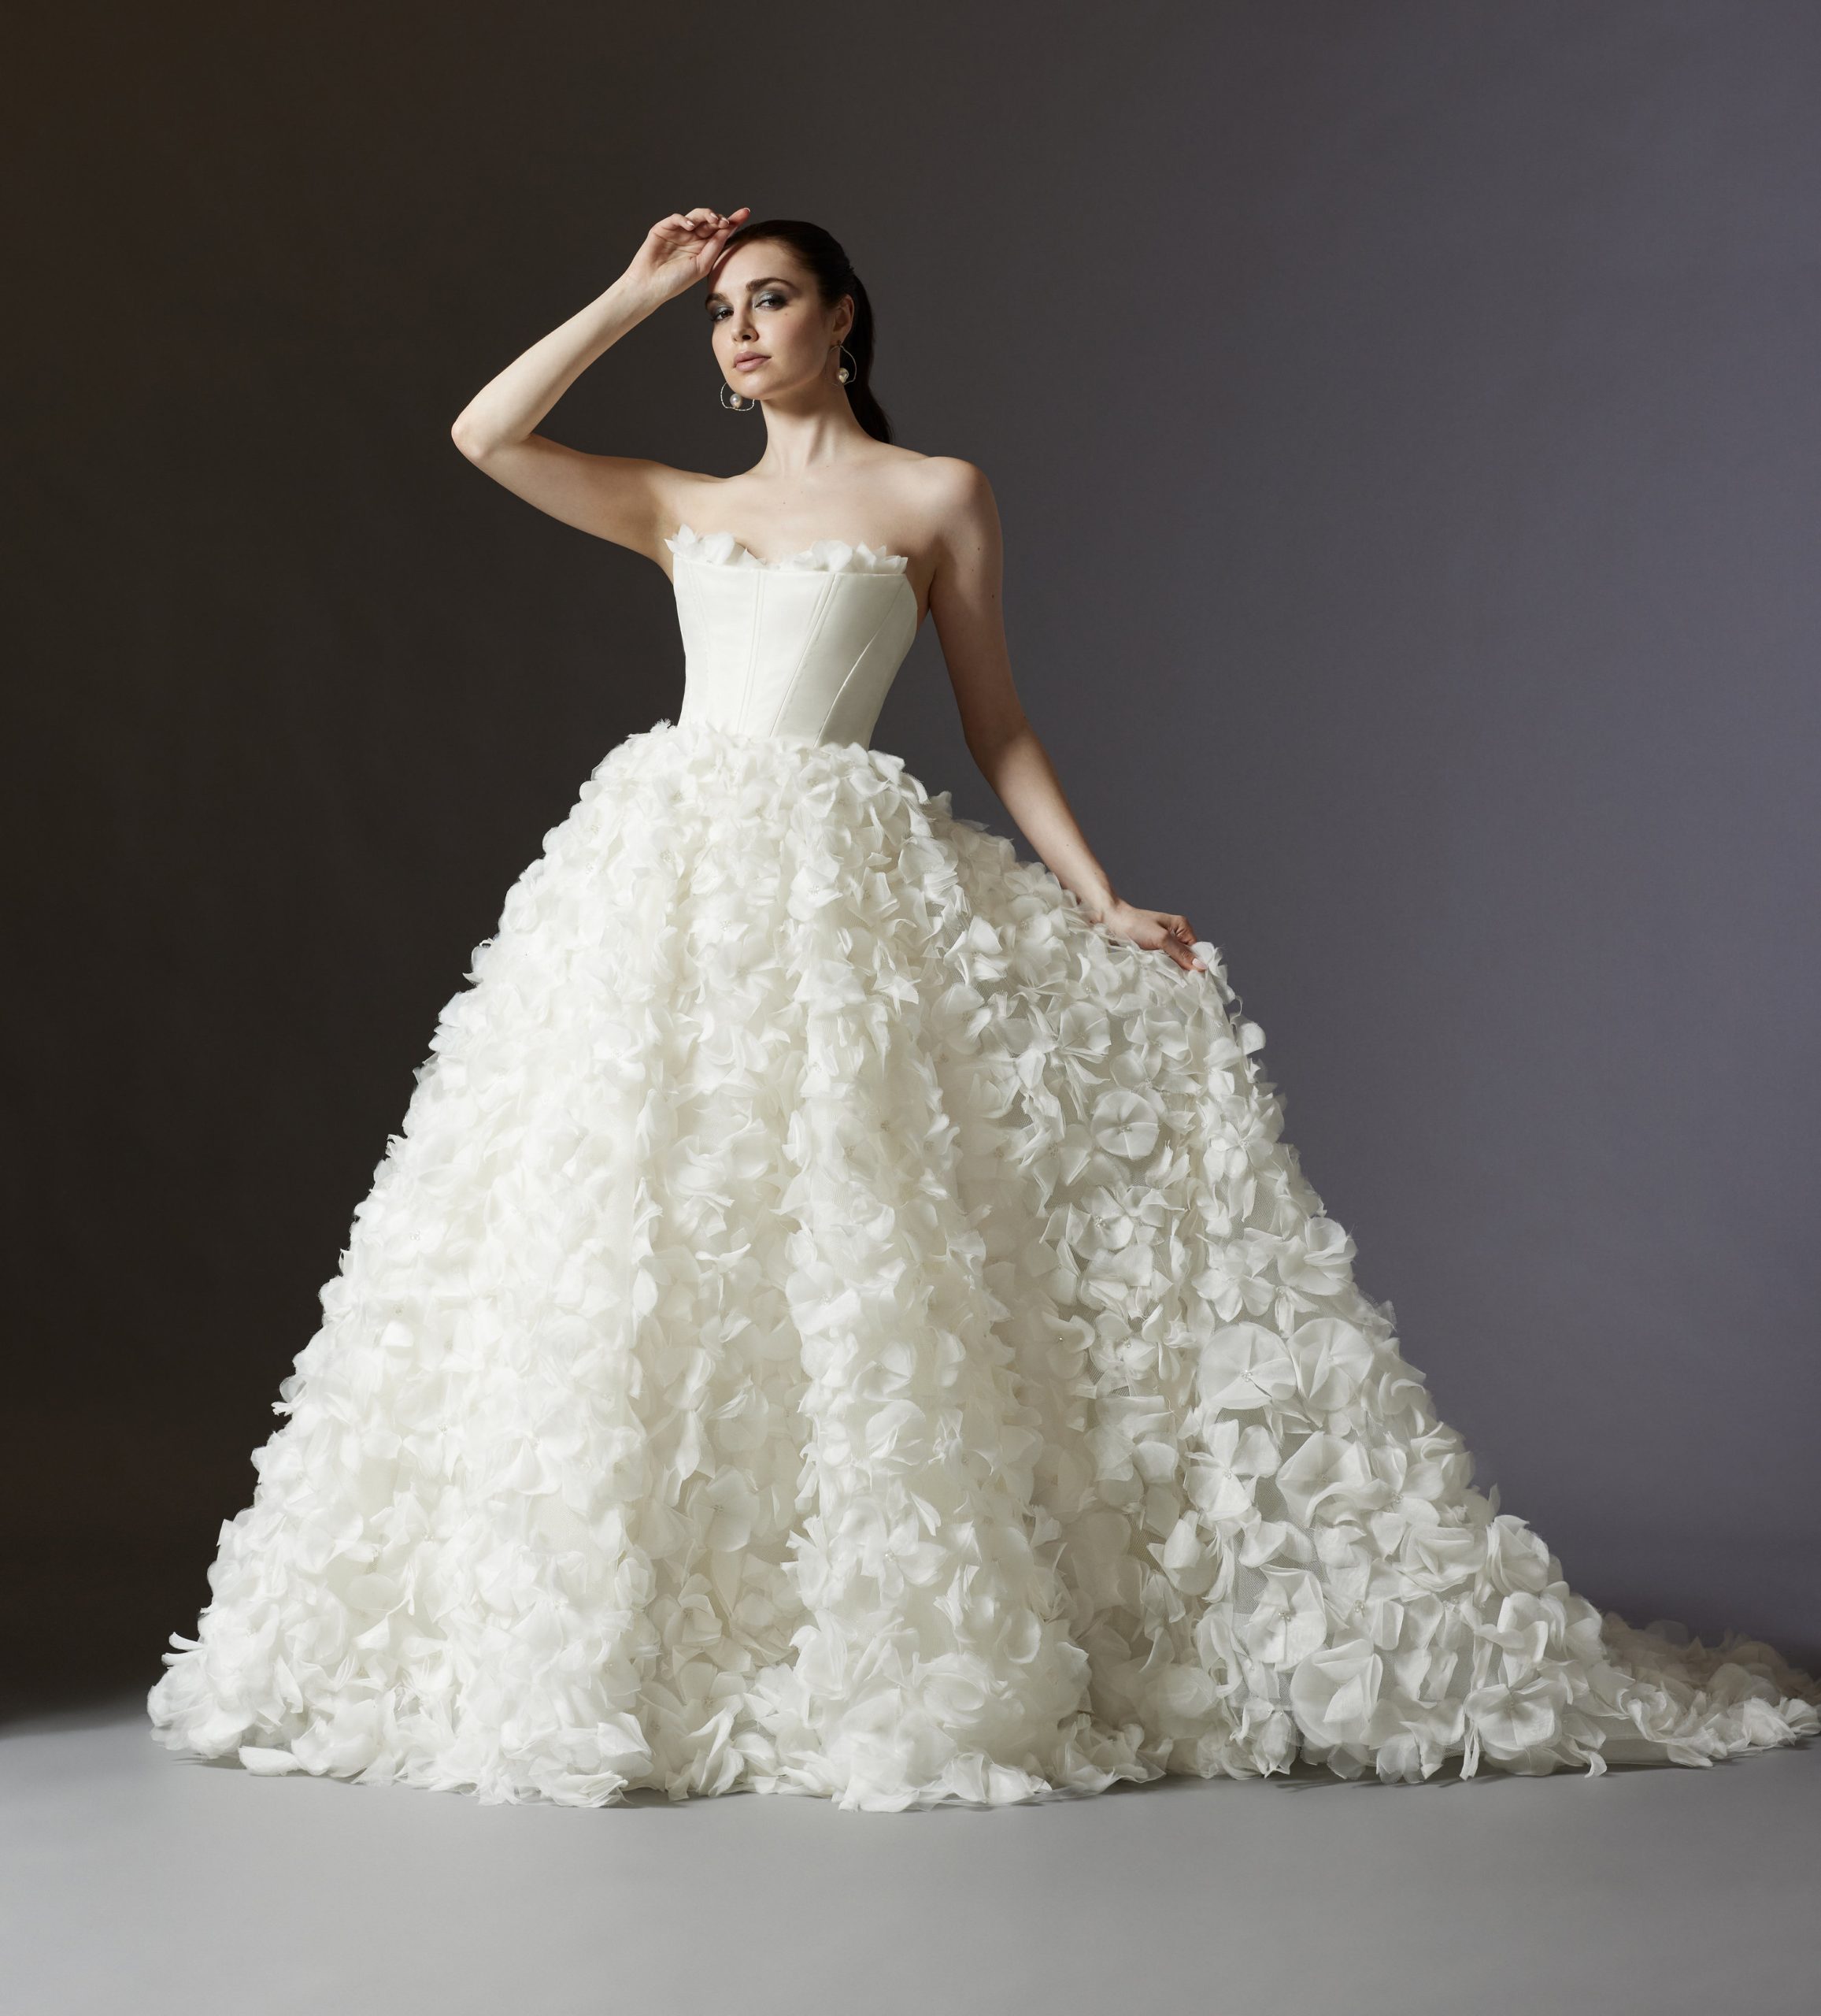 Strapless Ball Gown Wedding Dress With Textured Organza Floral